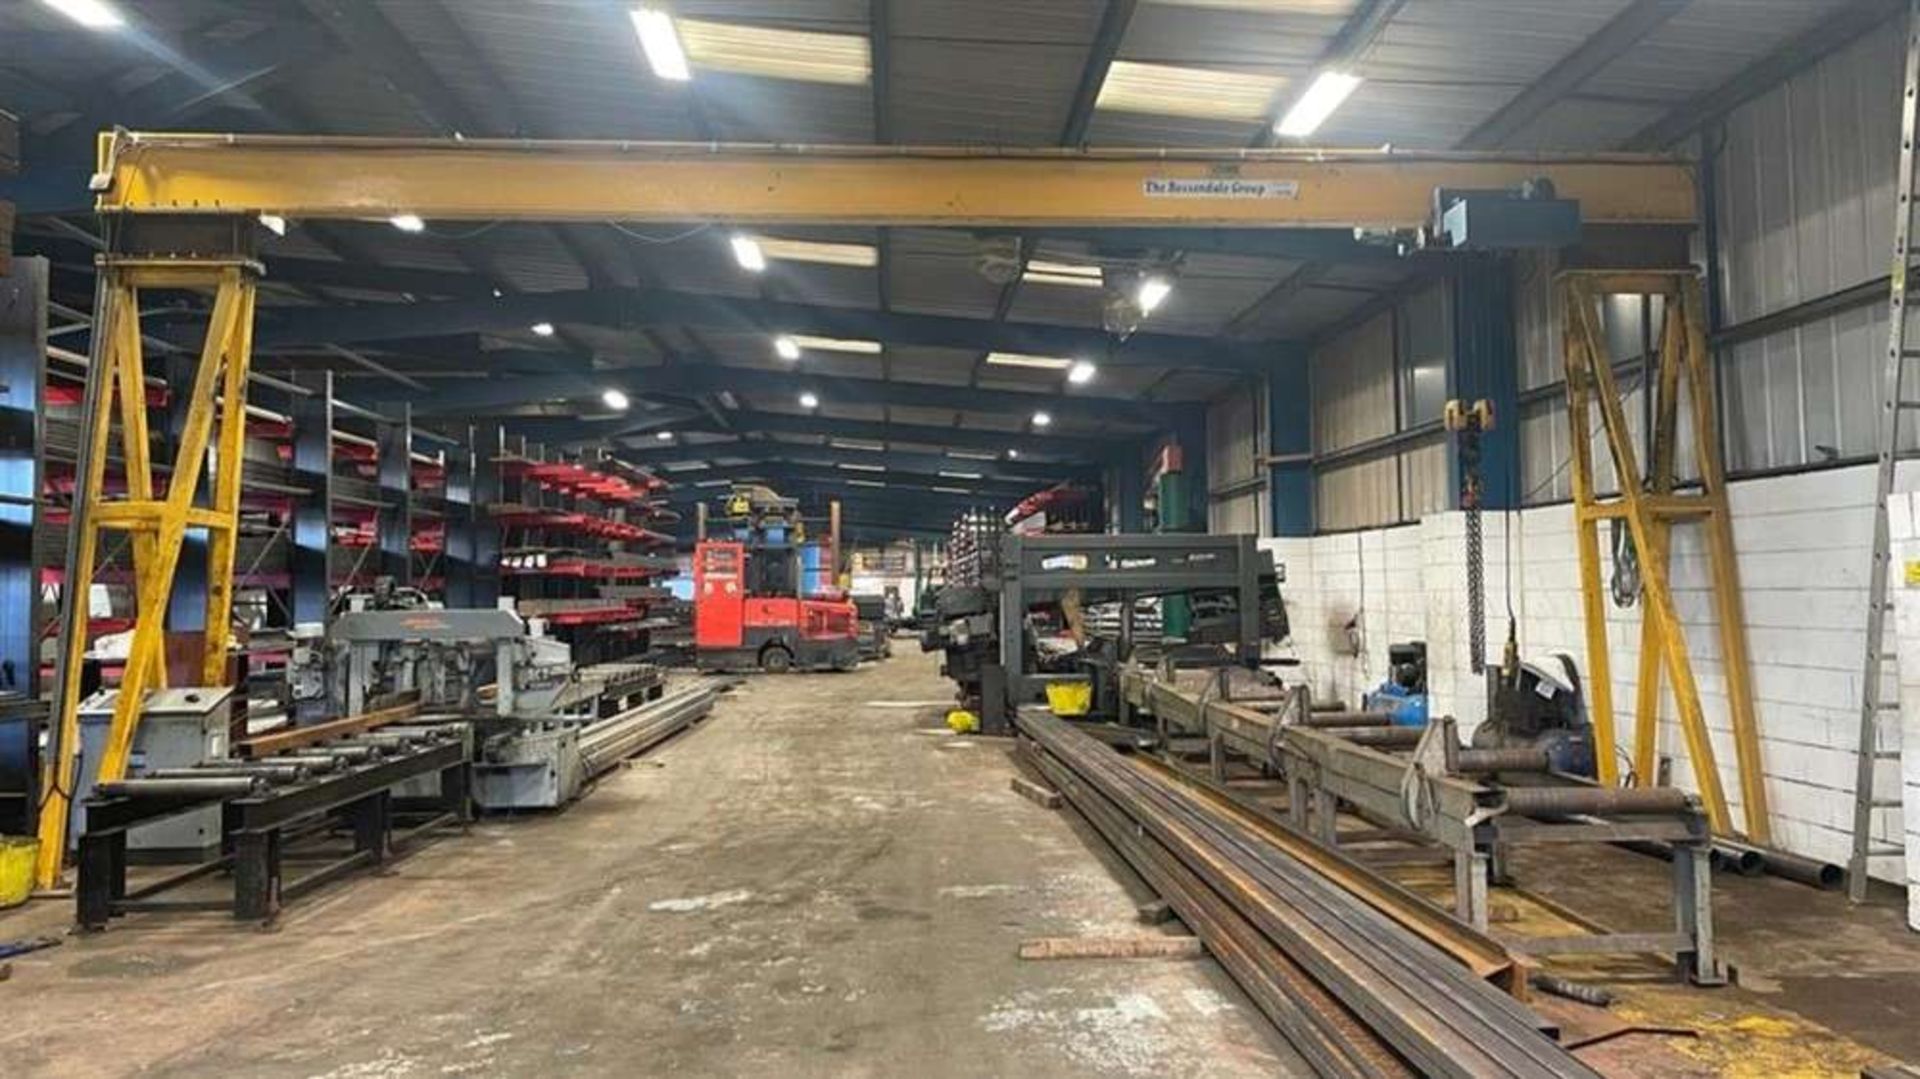 Demag 5 Tonne Free Standing Overhead Crane - Sold On Site (Location - Accrington) - Image 2 of 2